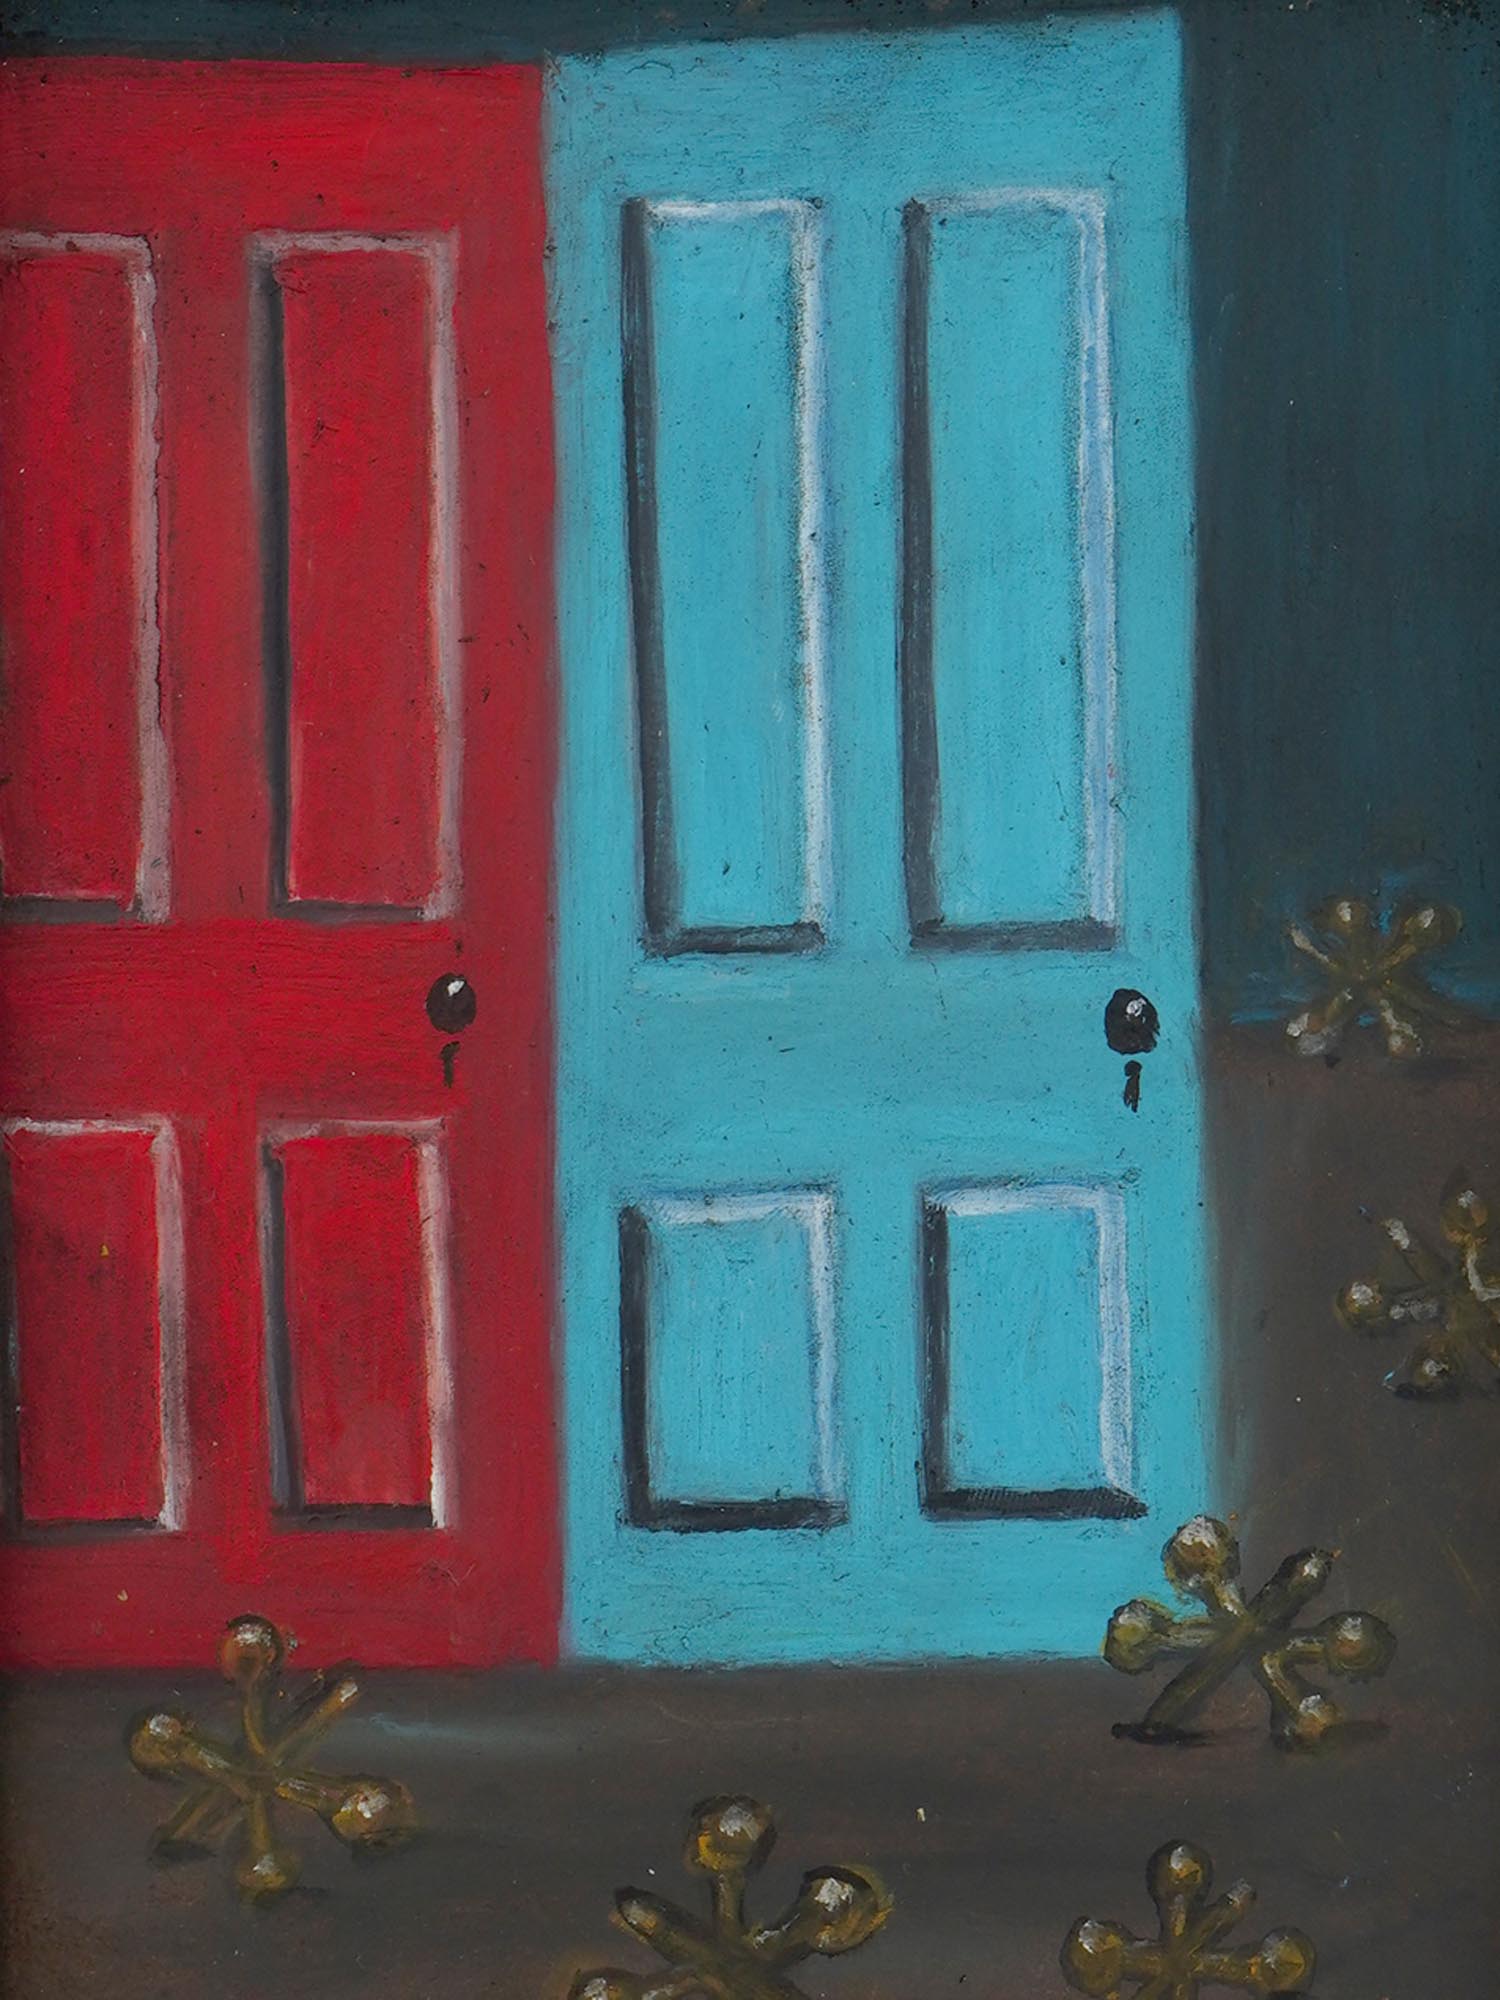 AMERICAN DOORS OIL PAINTING BY GERTRUDE ABERCROMBIE PIC-2